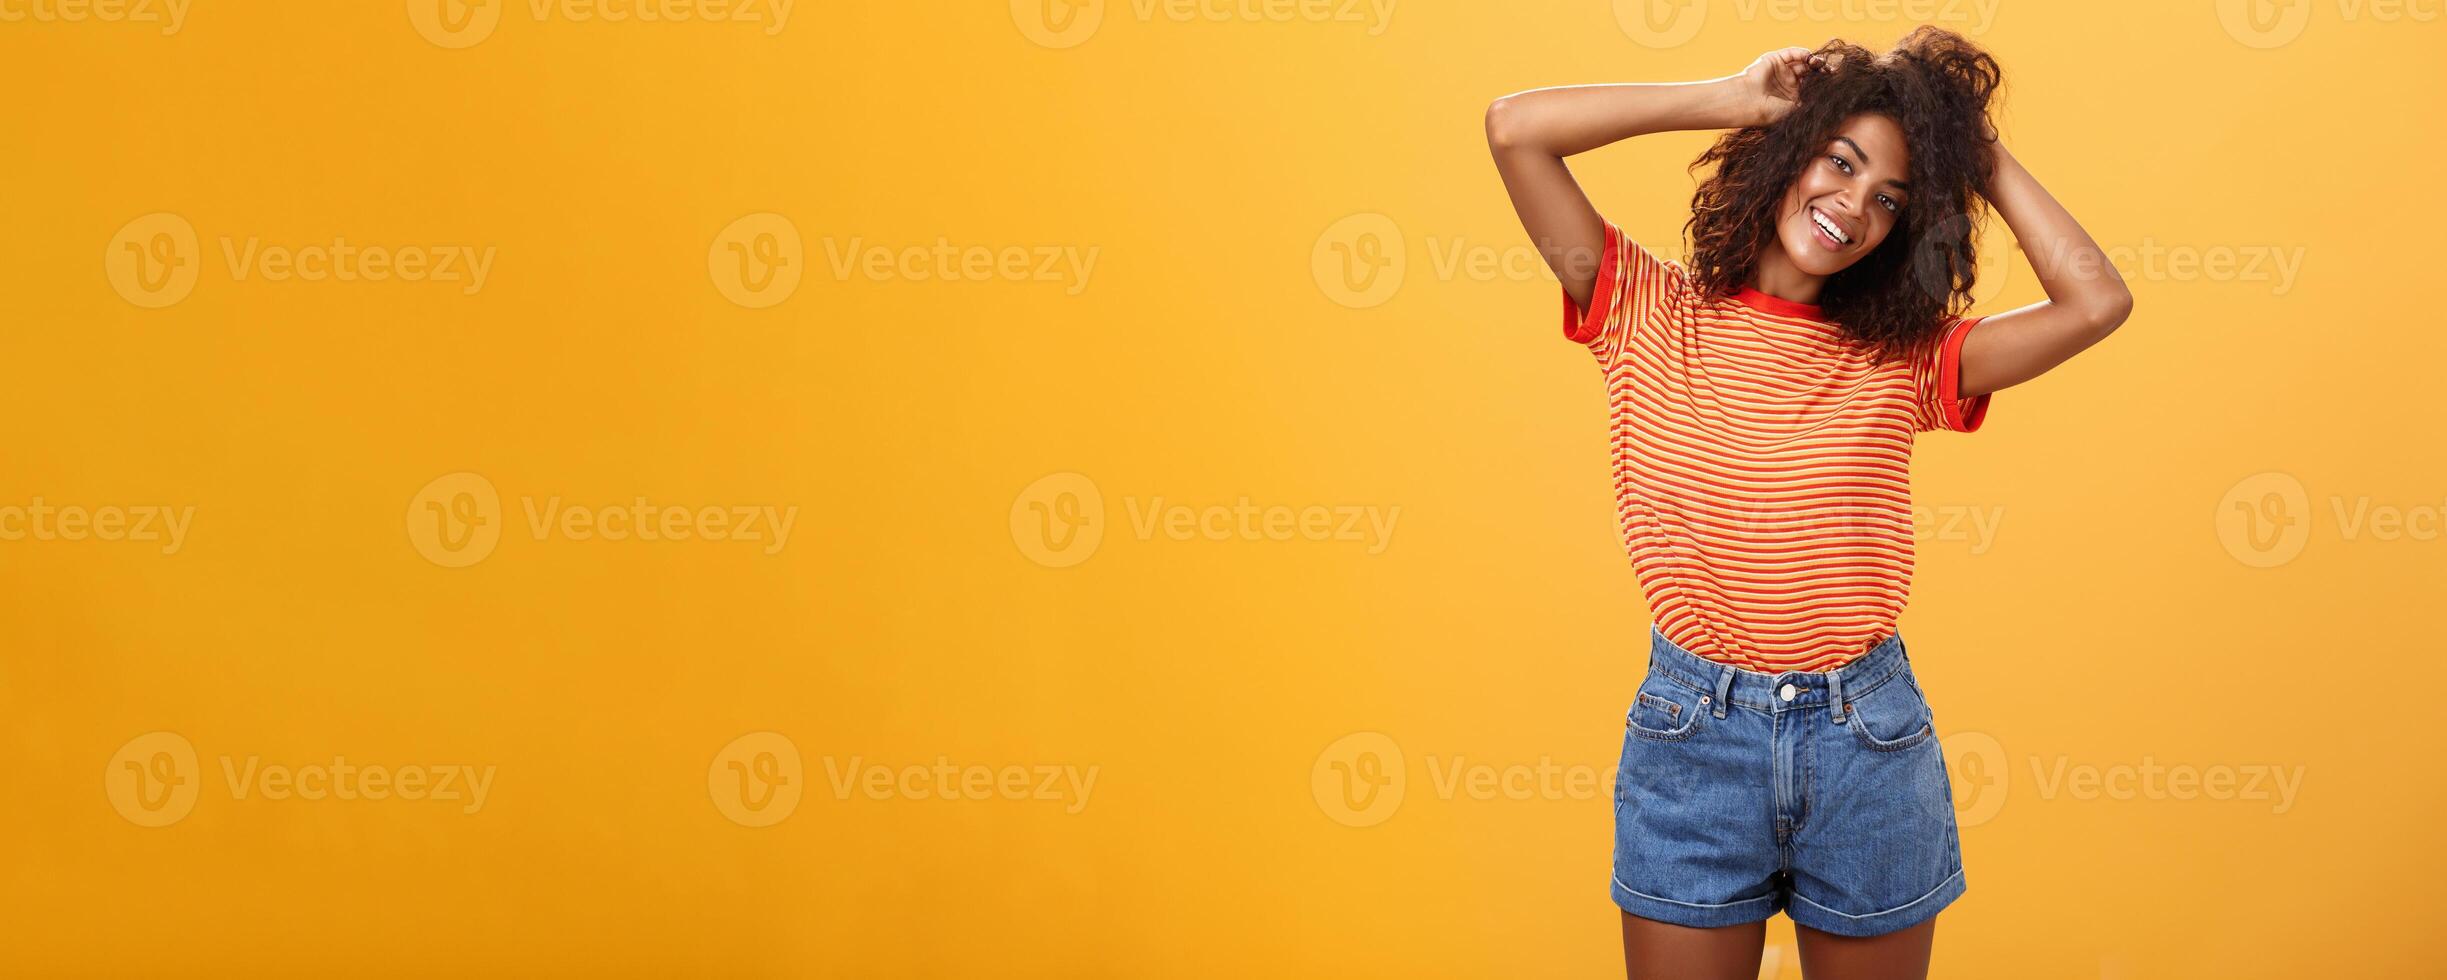 Time start living life fullest. Joyful optimistic woman having fun during vacation tilting head touching curly hair and enjoying summer sunshine in trendy striped t-shirt and shorts over orange wall photo